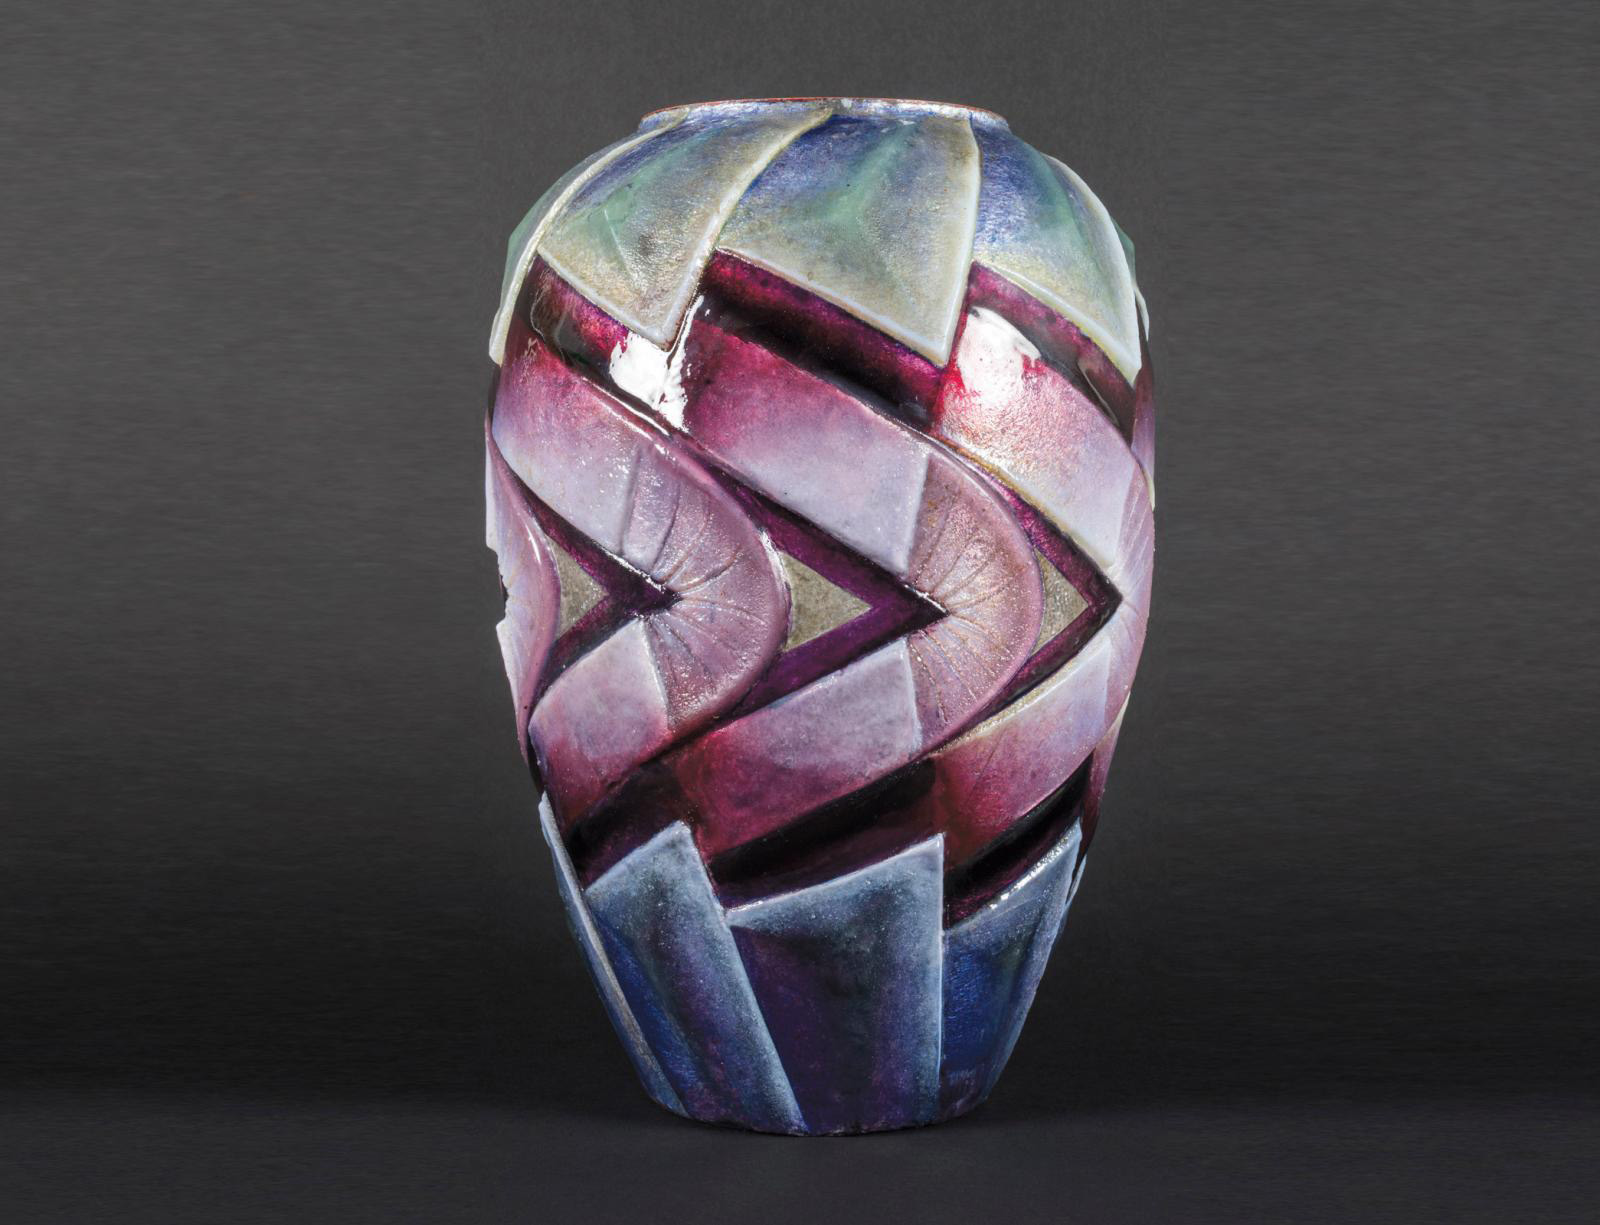 Ovoid copper vase with polychrome vitreous enamel geometric patterns on a granite background, signed "C. Fauré Limoges", h. 29 cm/11.42 in